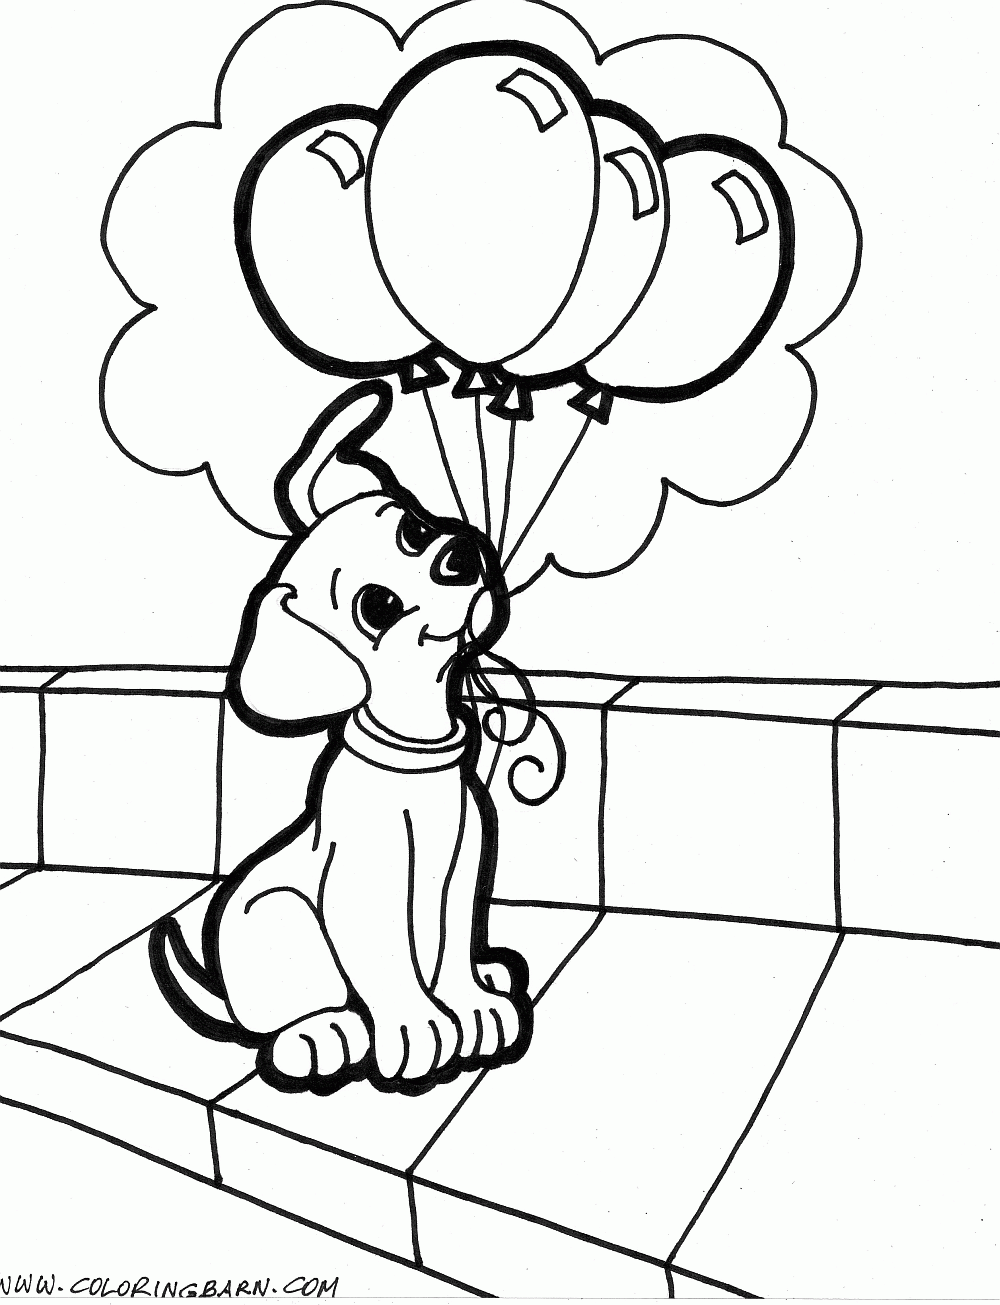 Of Kittens And Puppies - Coloring Pages for Kids and for Adults